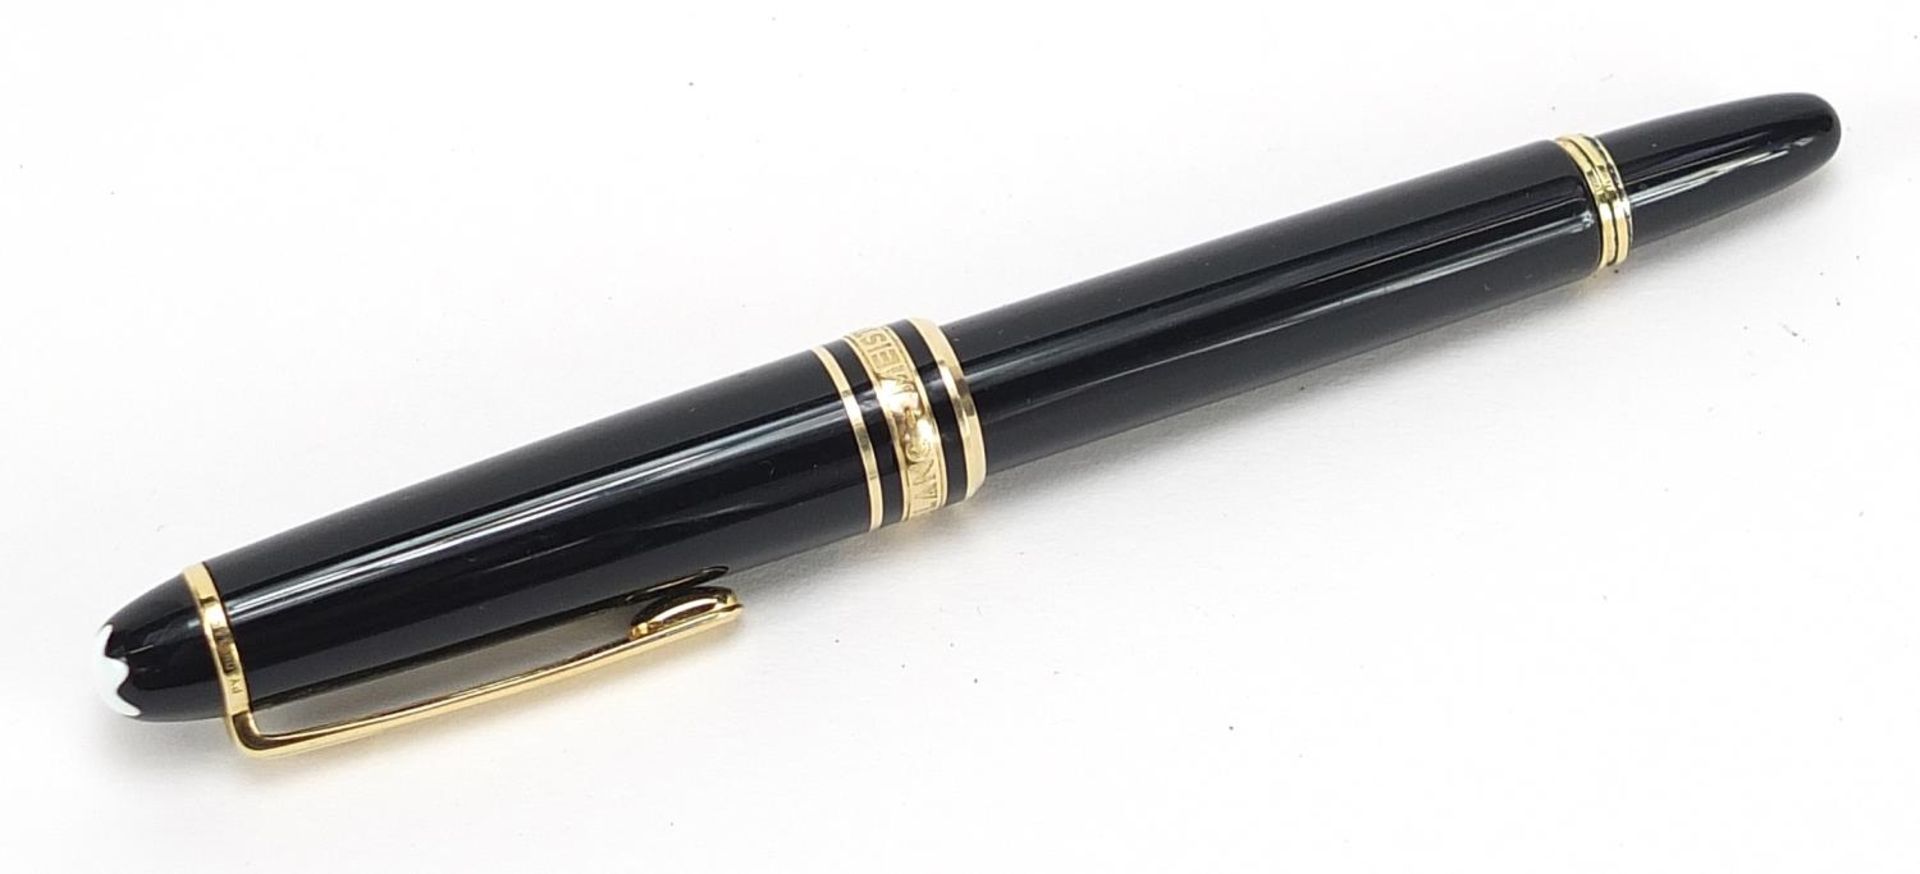 Montblanc Meisterstuck fountain pen with 14k gold nib numbered 4810, serial number PY1046185 - Bild 4 aus 5